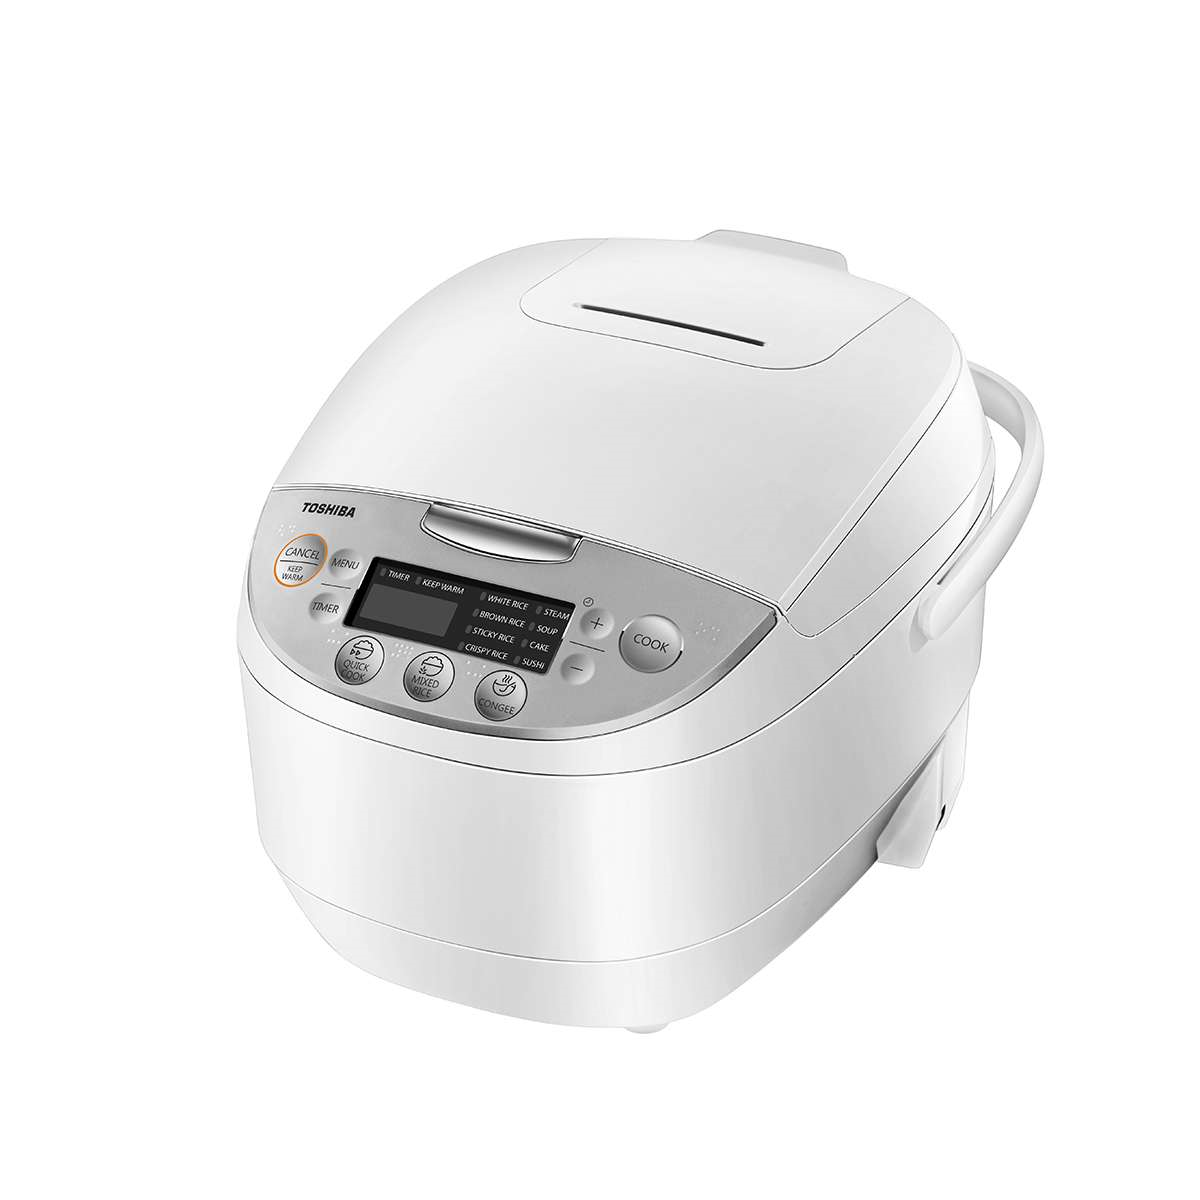 TOSHIBA 1.8L RICE COOKER RC-T18DR1